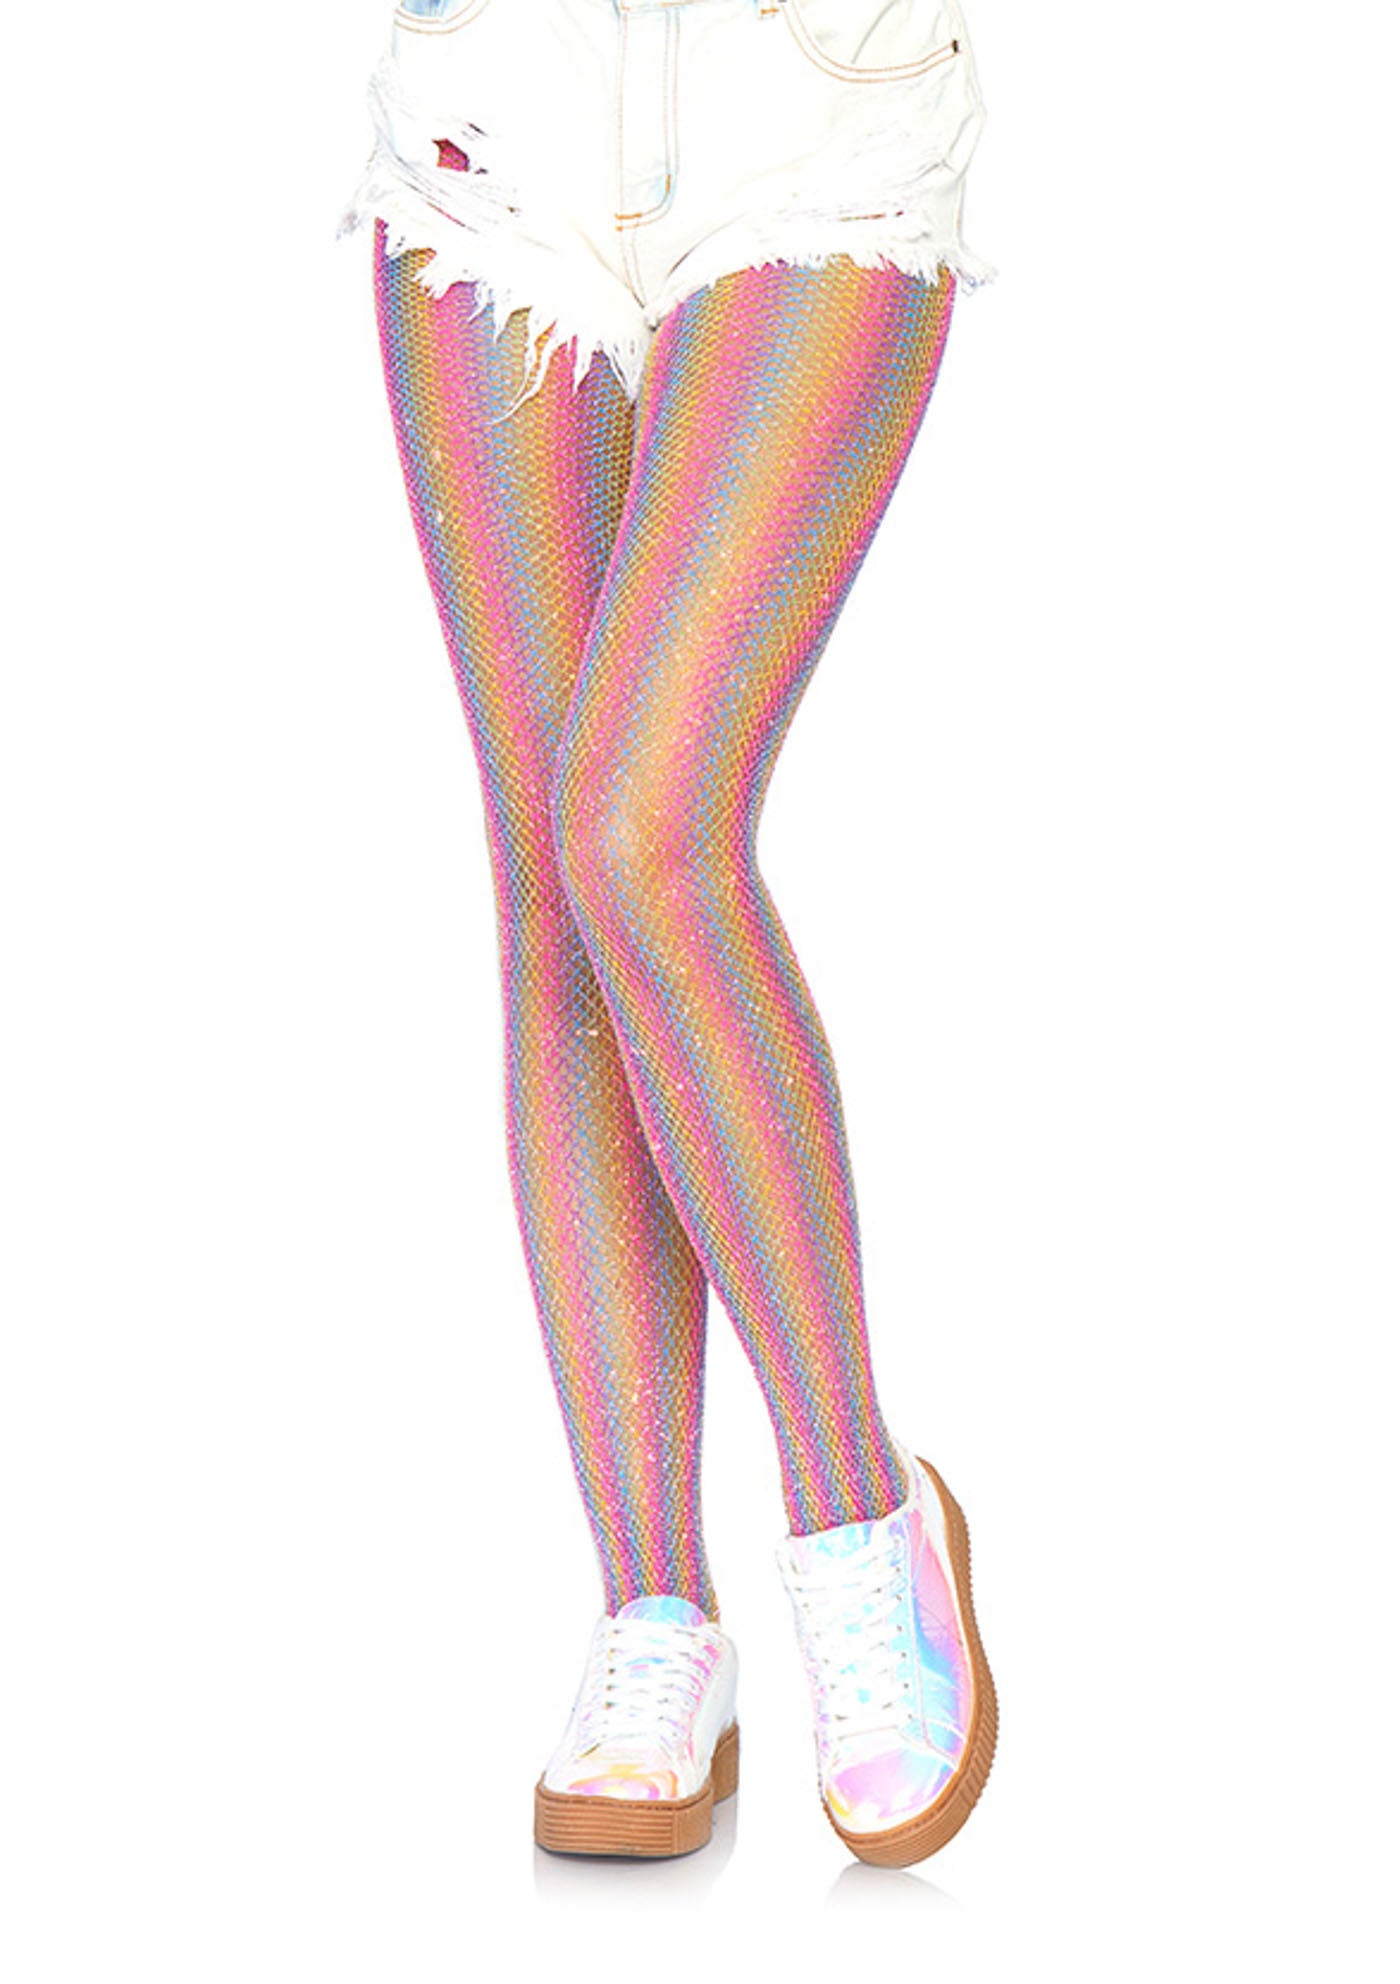 Leg Avenue 9308 Lurex Rainbow Fishnet Tights - Micro fishnet sparkly glitter tights with vertical rainbow coloured stripes.